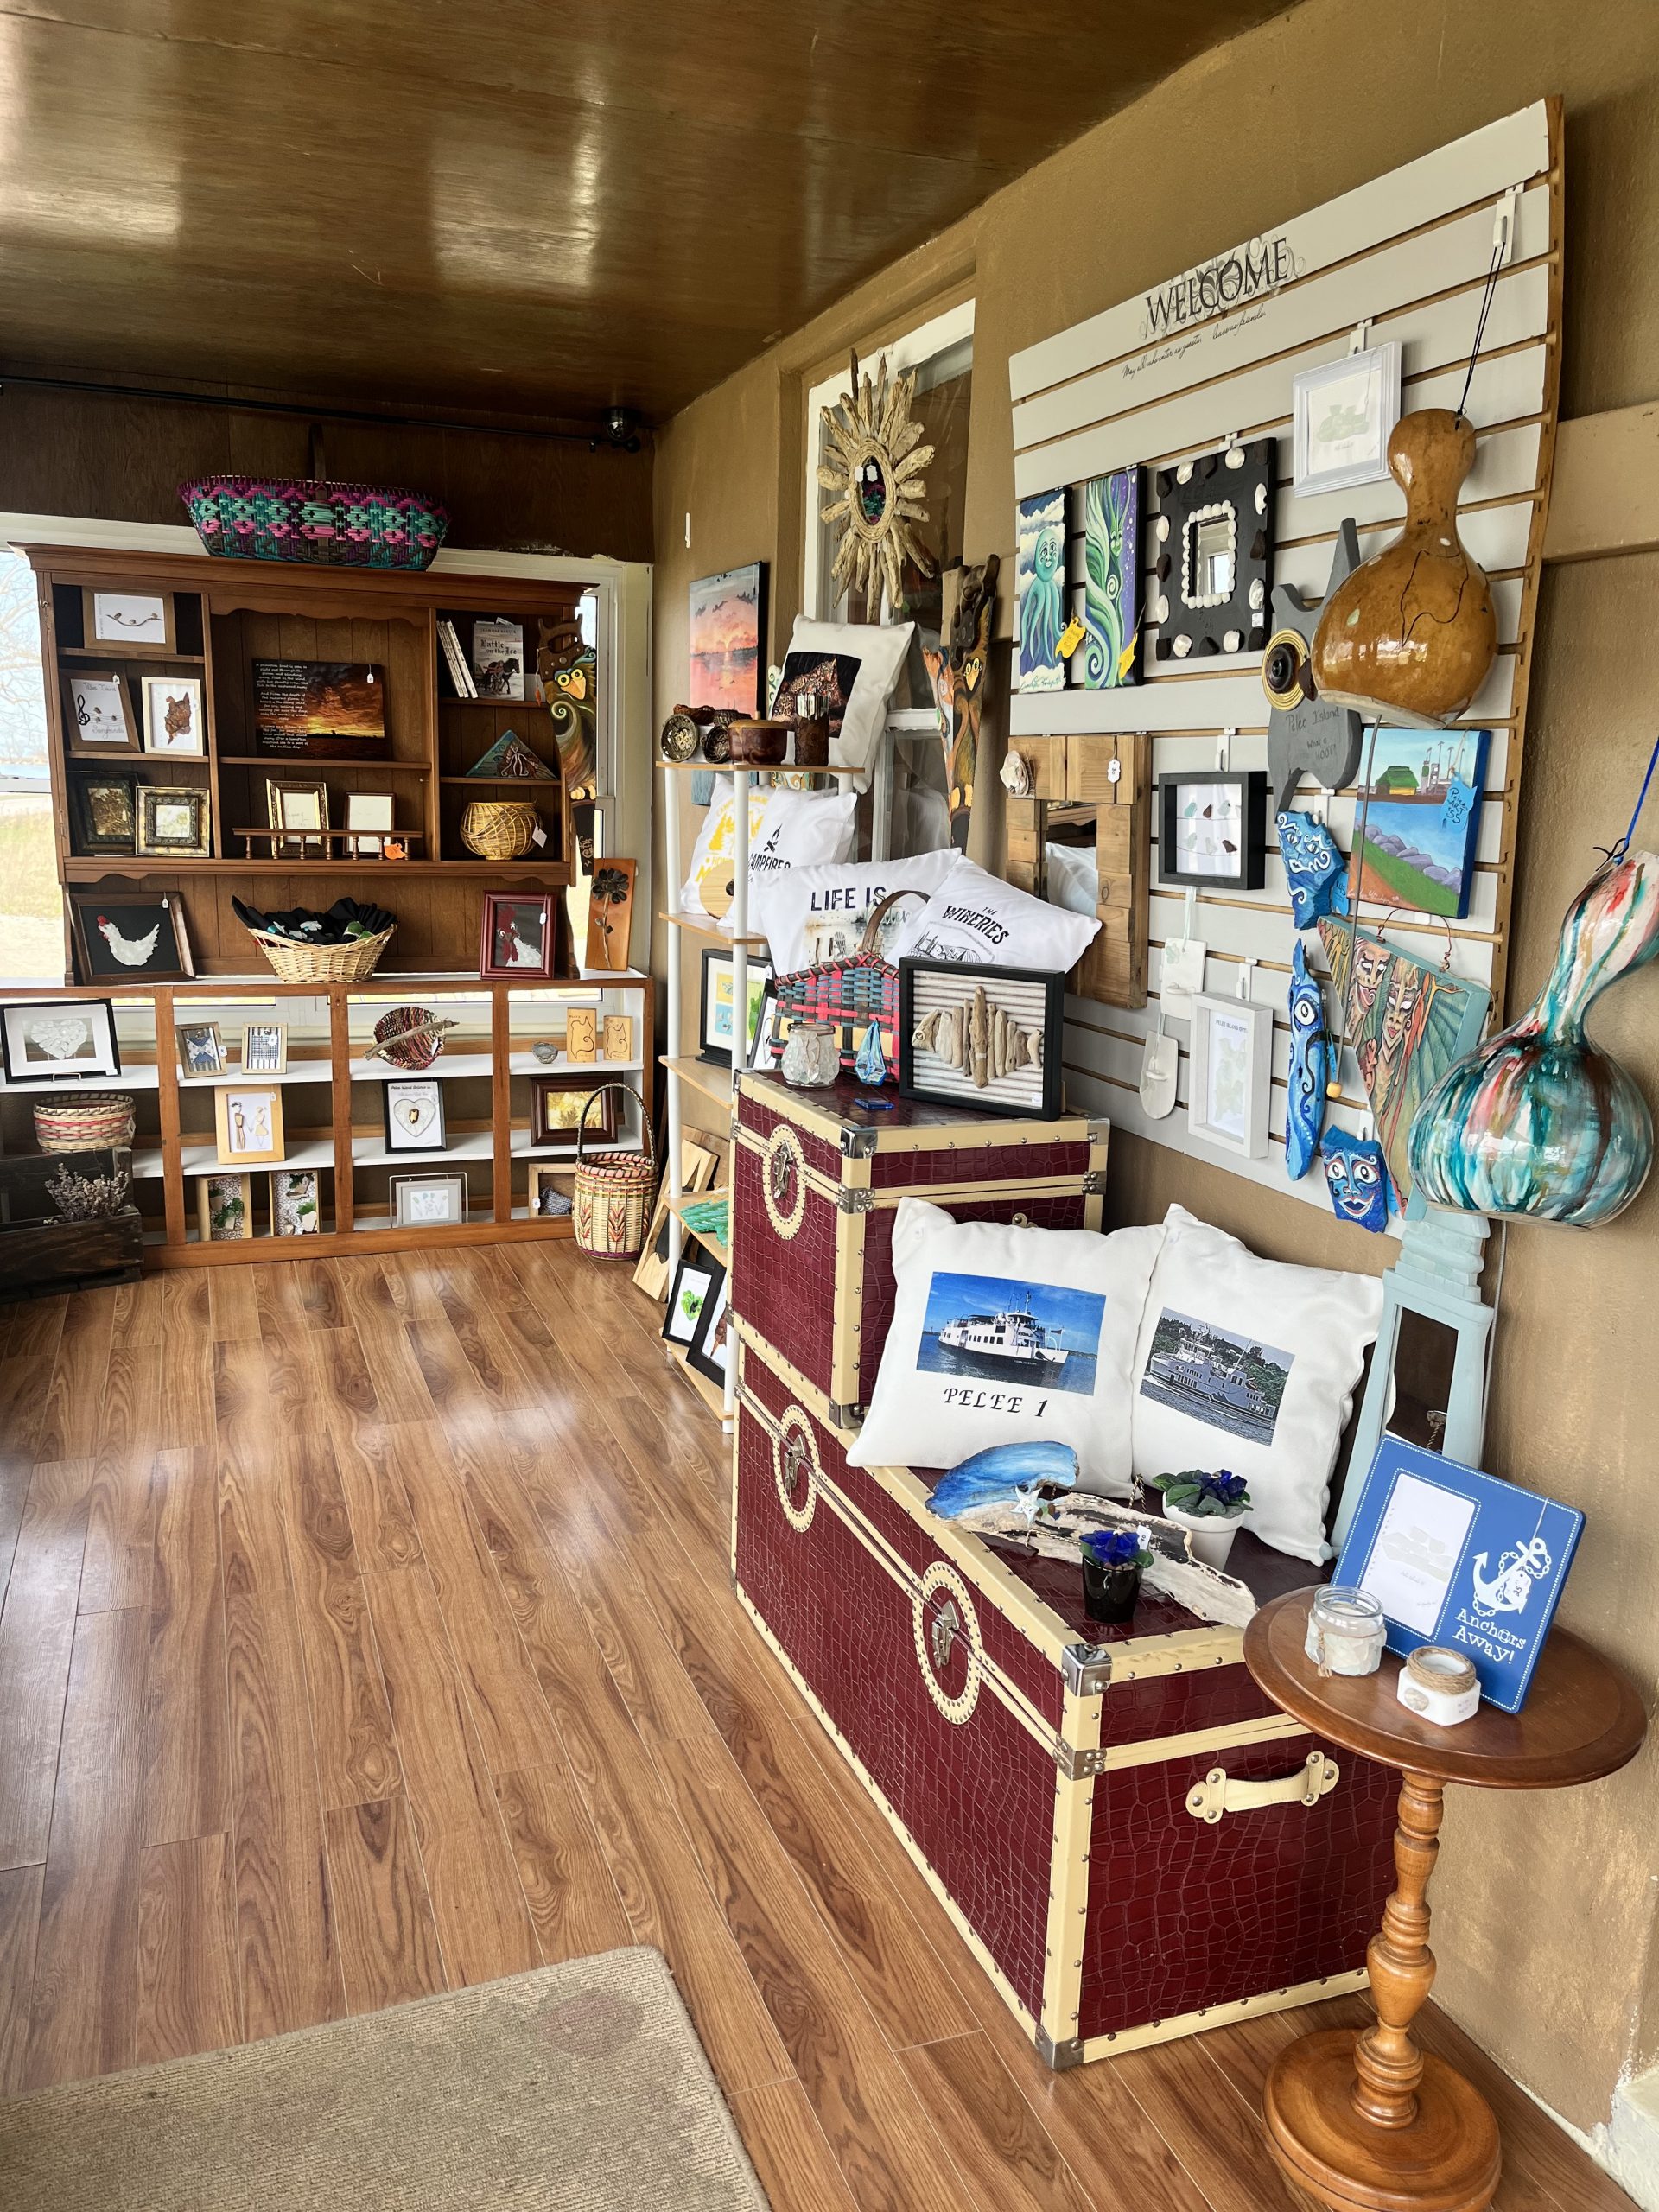 one of a kind pelee island gifts and souvenirs